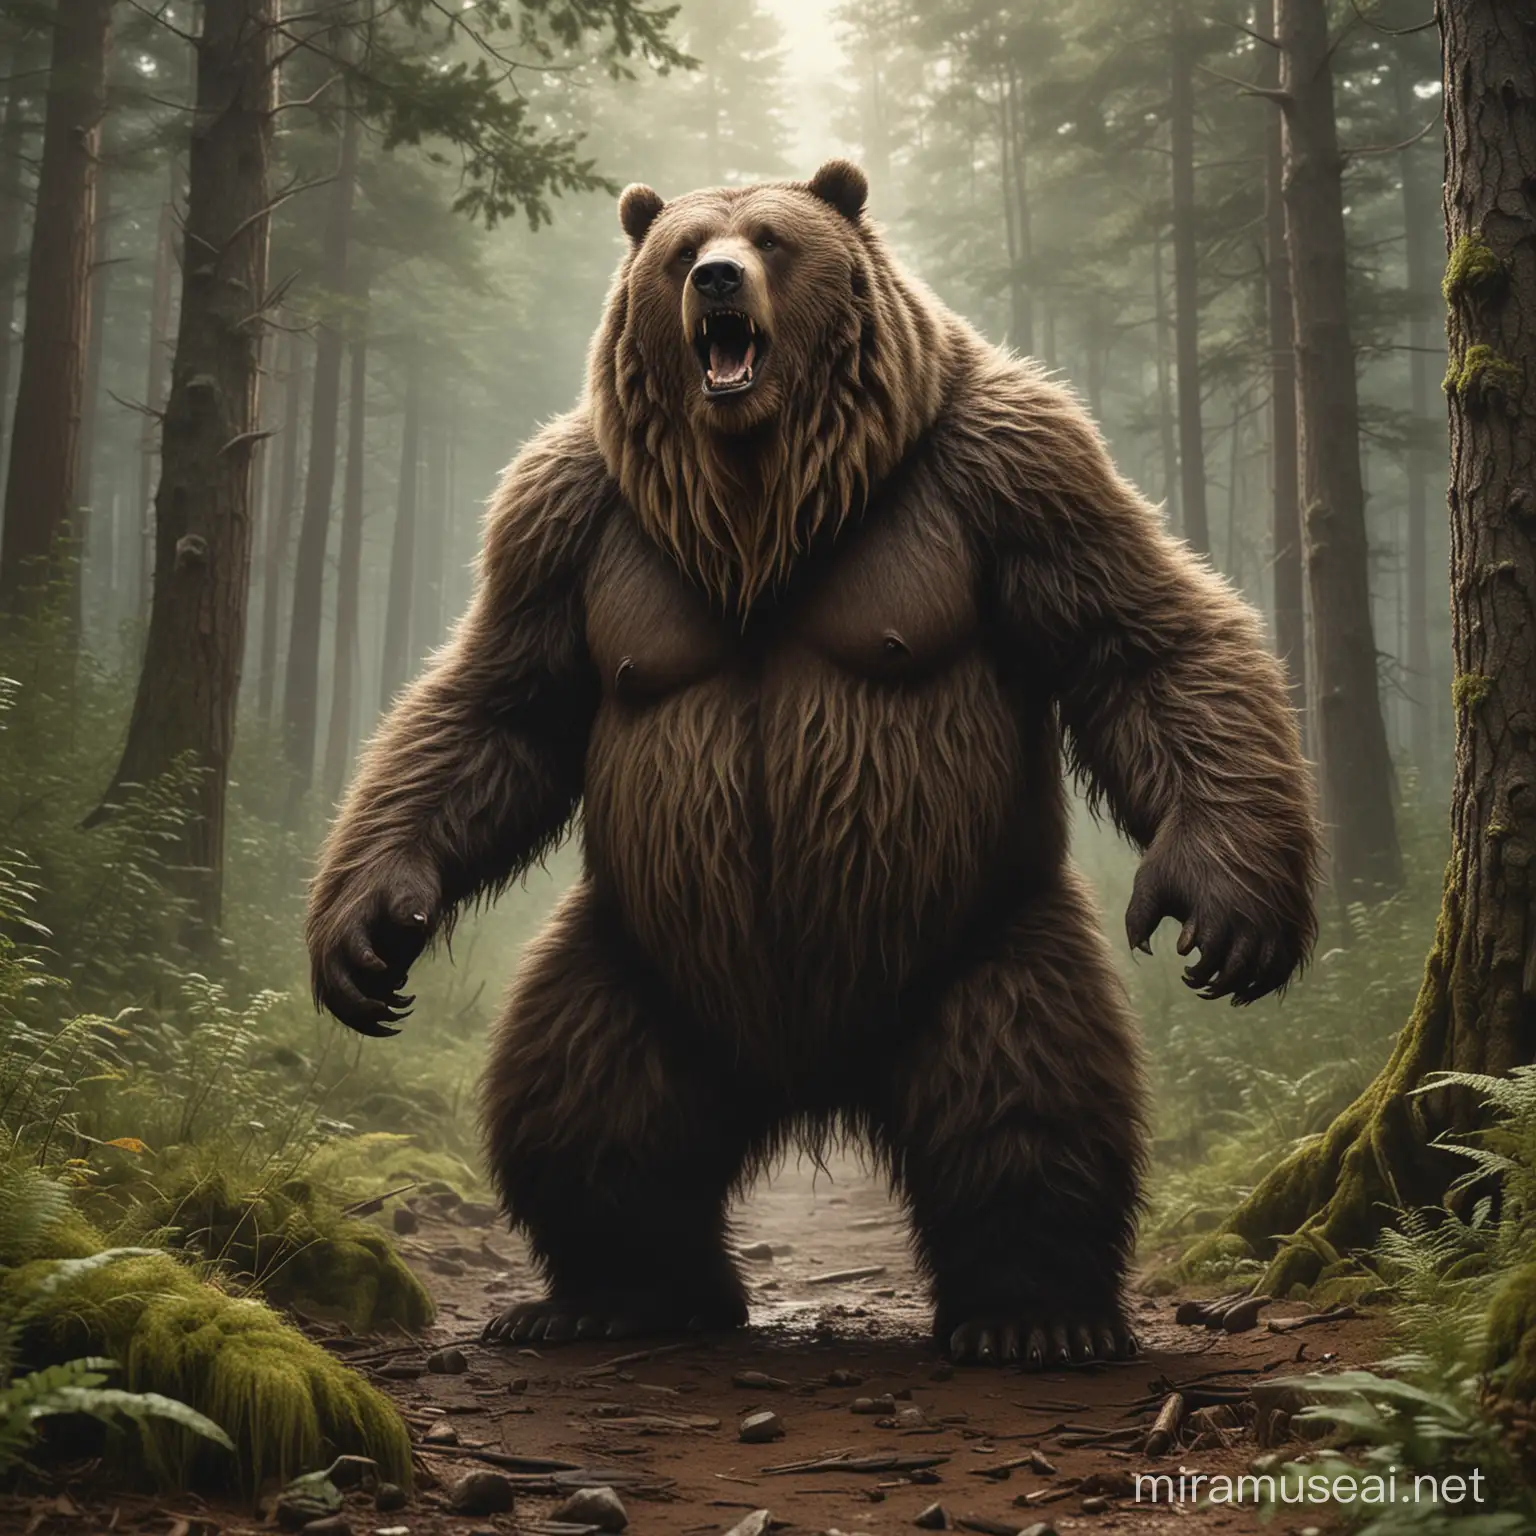 werebear,chubby,shorty,hairy,long beard,Mess hair,primitive,deep forest,on all fours,Roaring to the sky